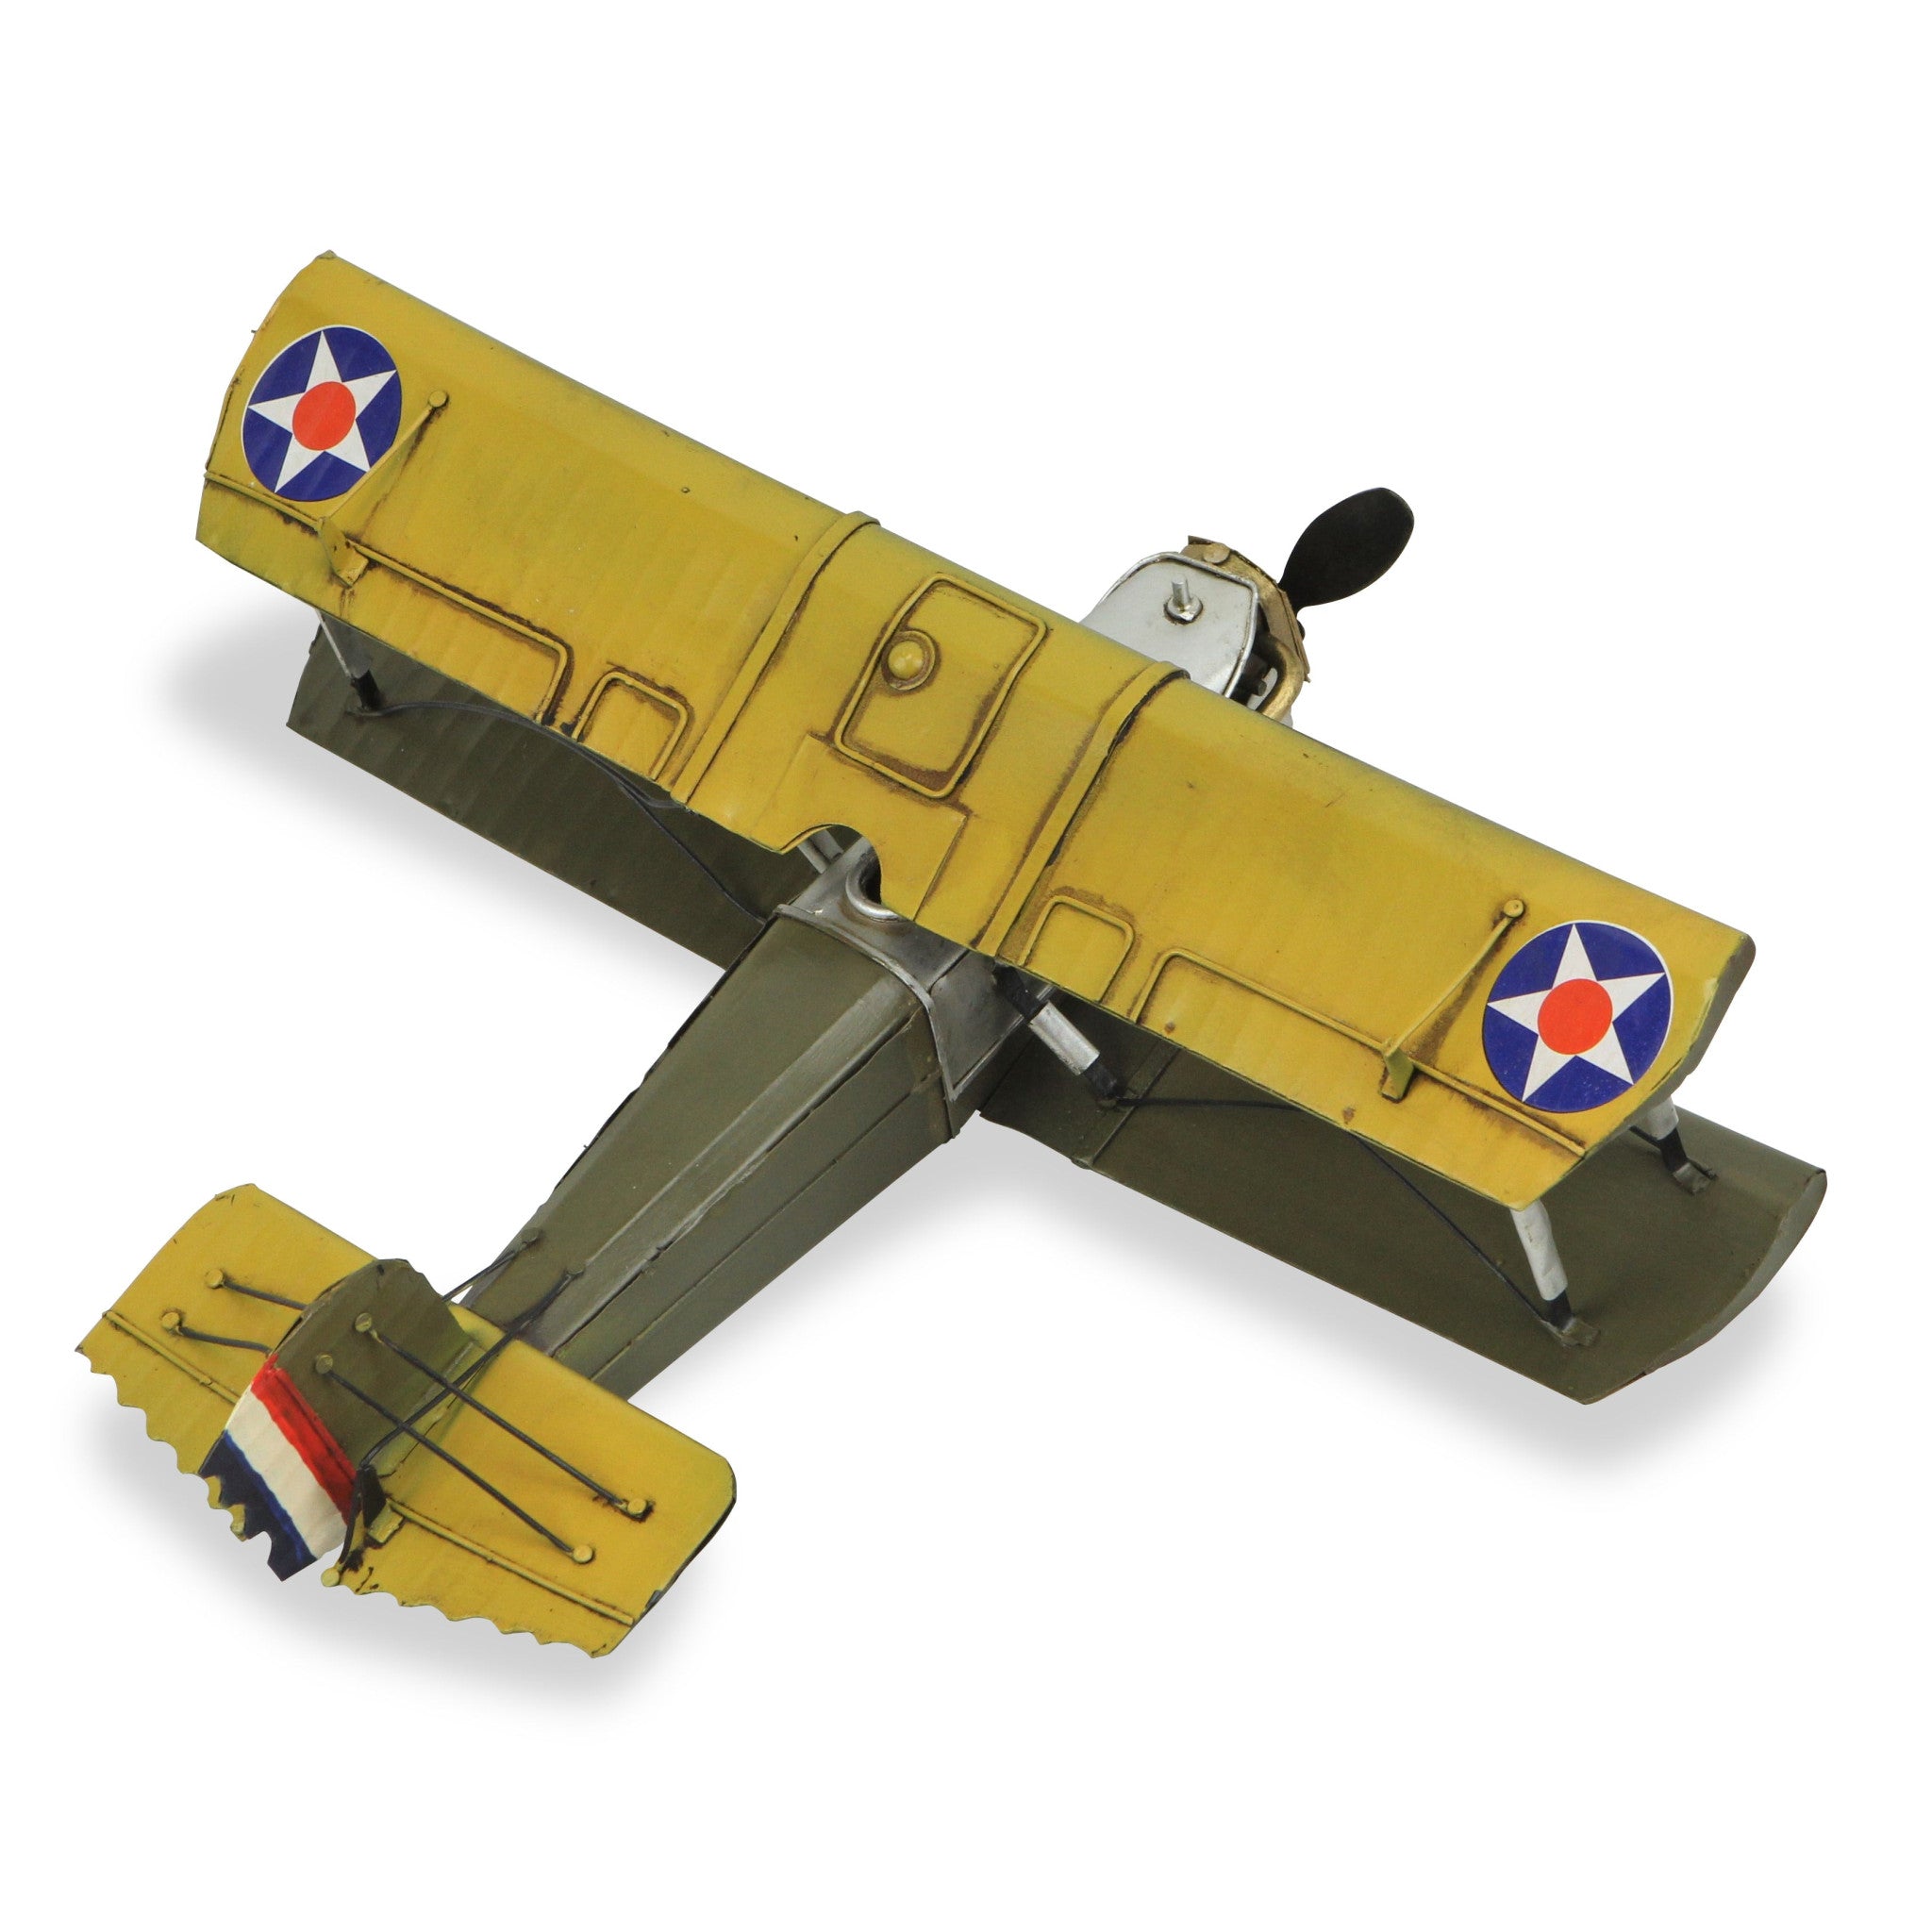 6" Yellow and Green Metal Hand Painted Model Airplane